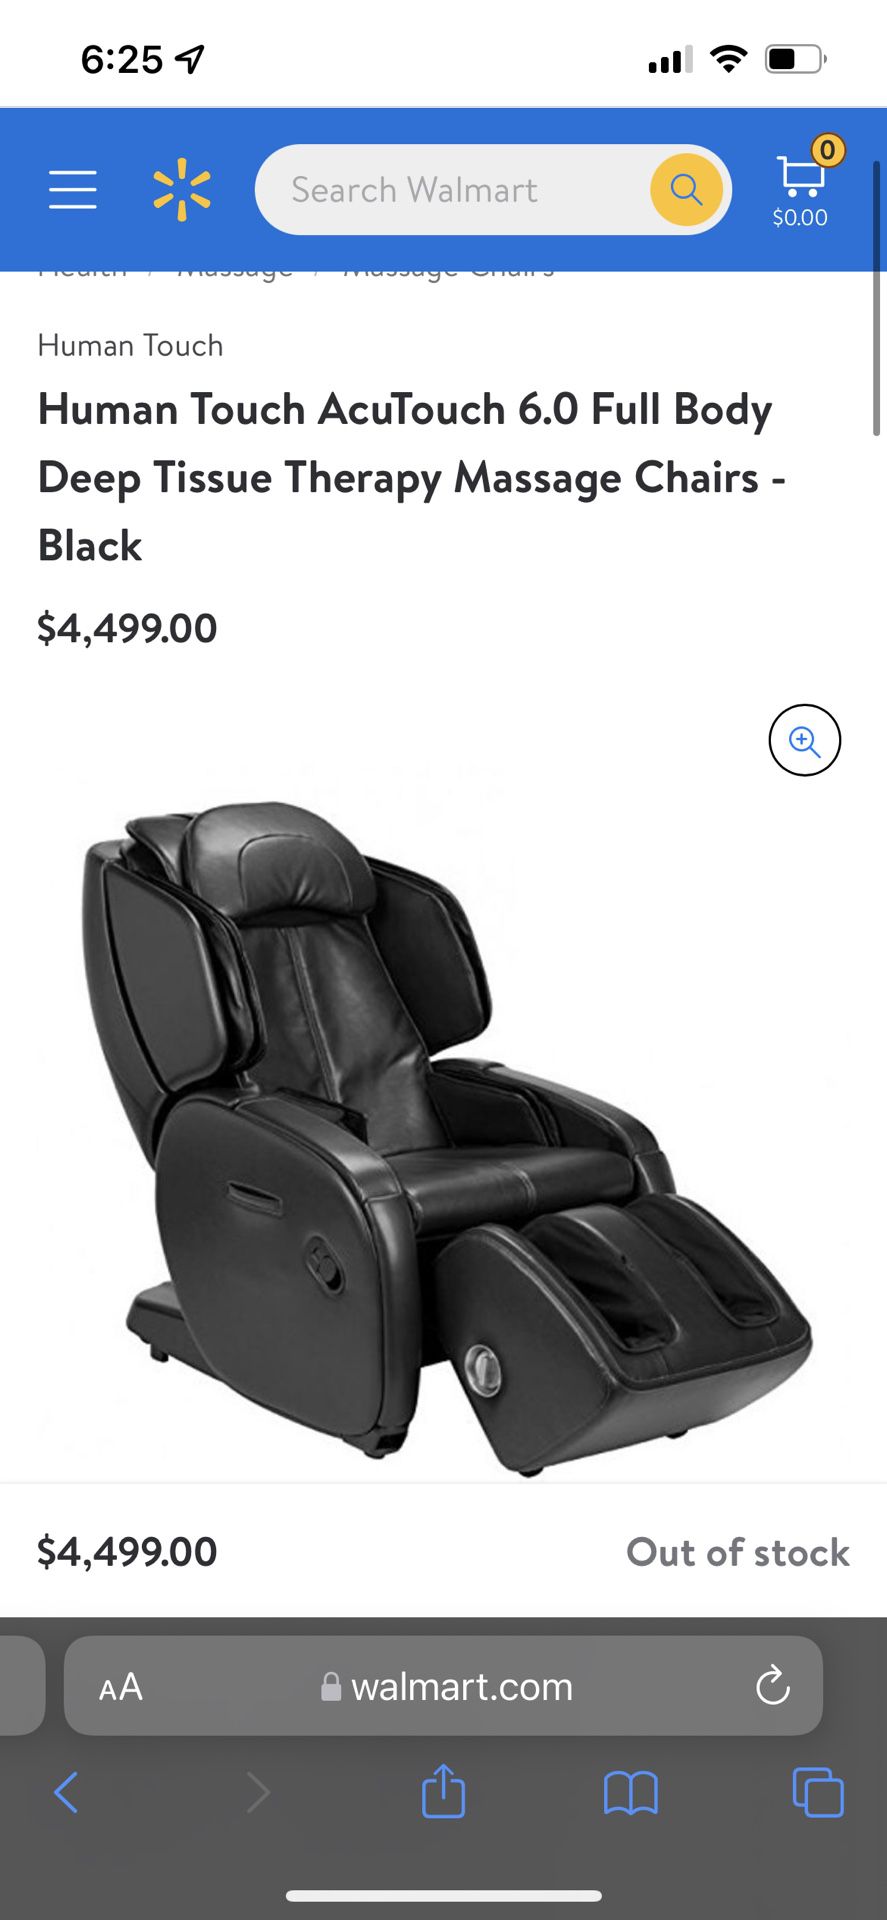 HUMAN TOUCH ACUTOUCH 6.0 MASSAGE CHAIR 